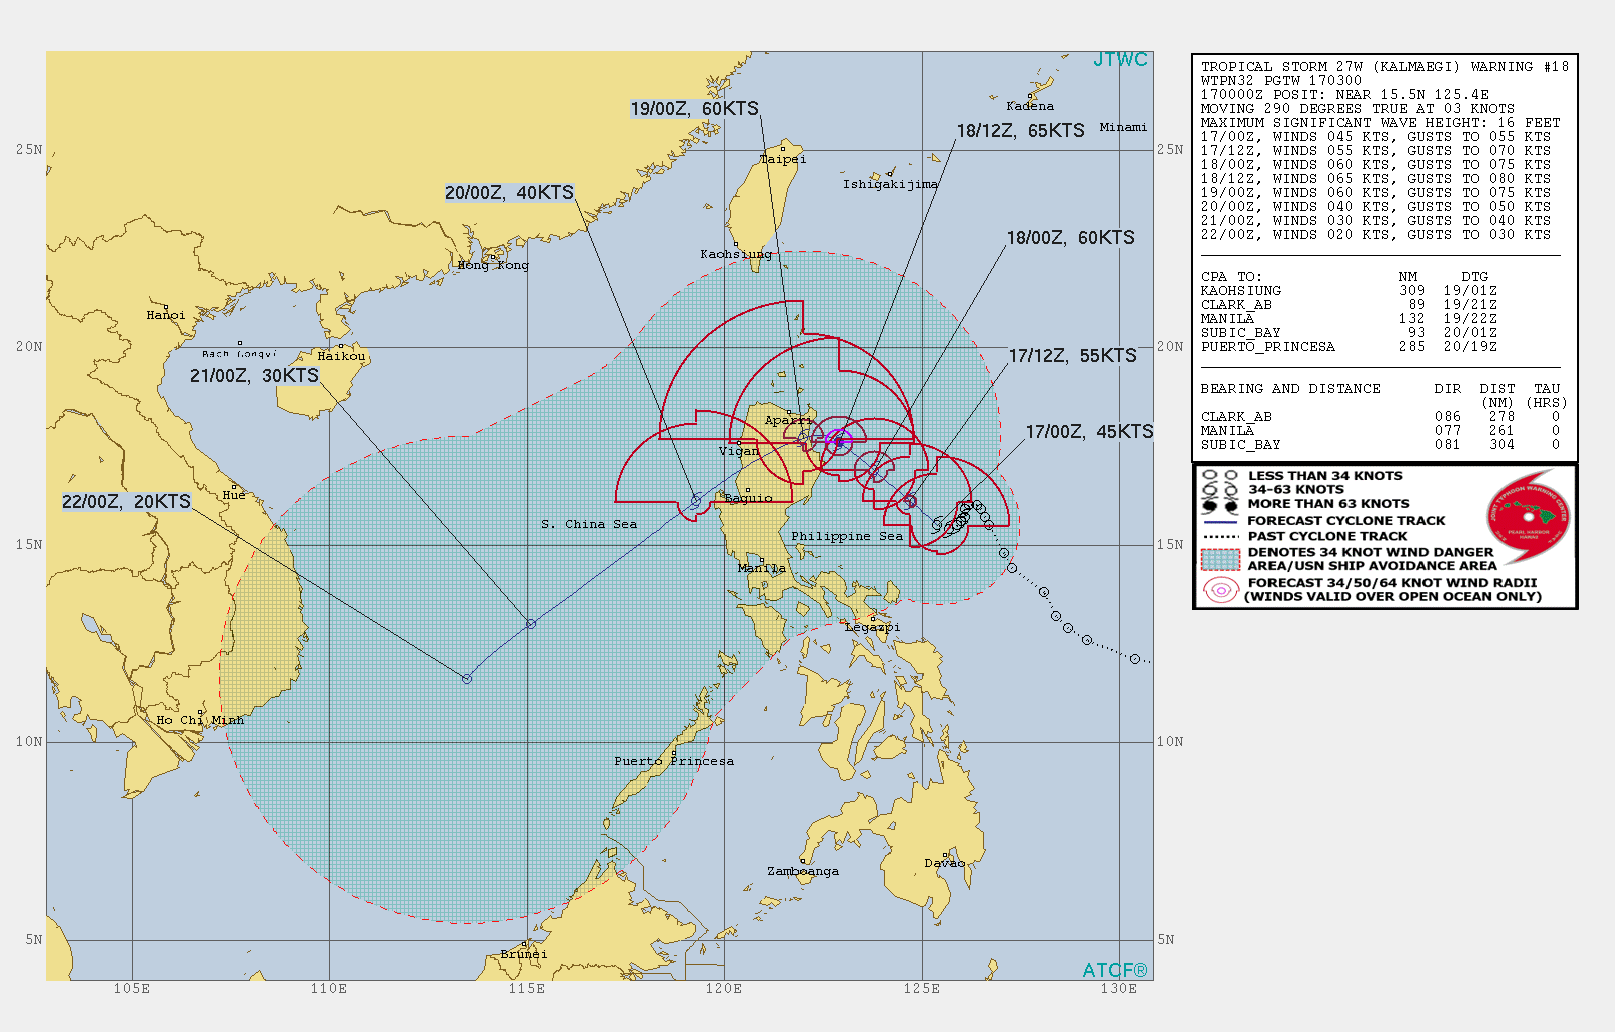 TS 27W: SLOWLY APPROACHING NORTHEAST LUZON WHILE INTENSIFYING